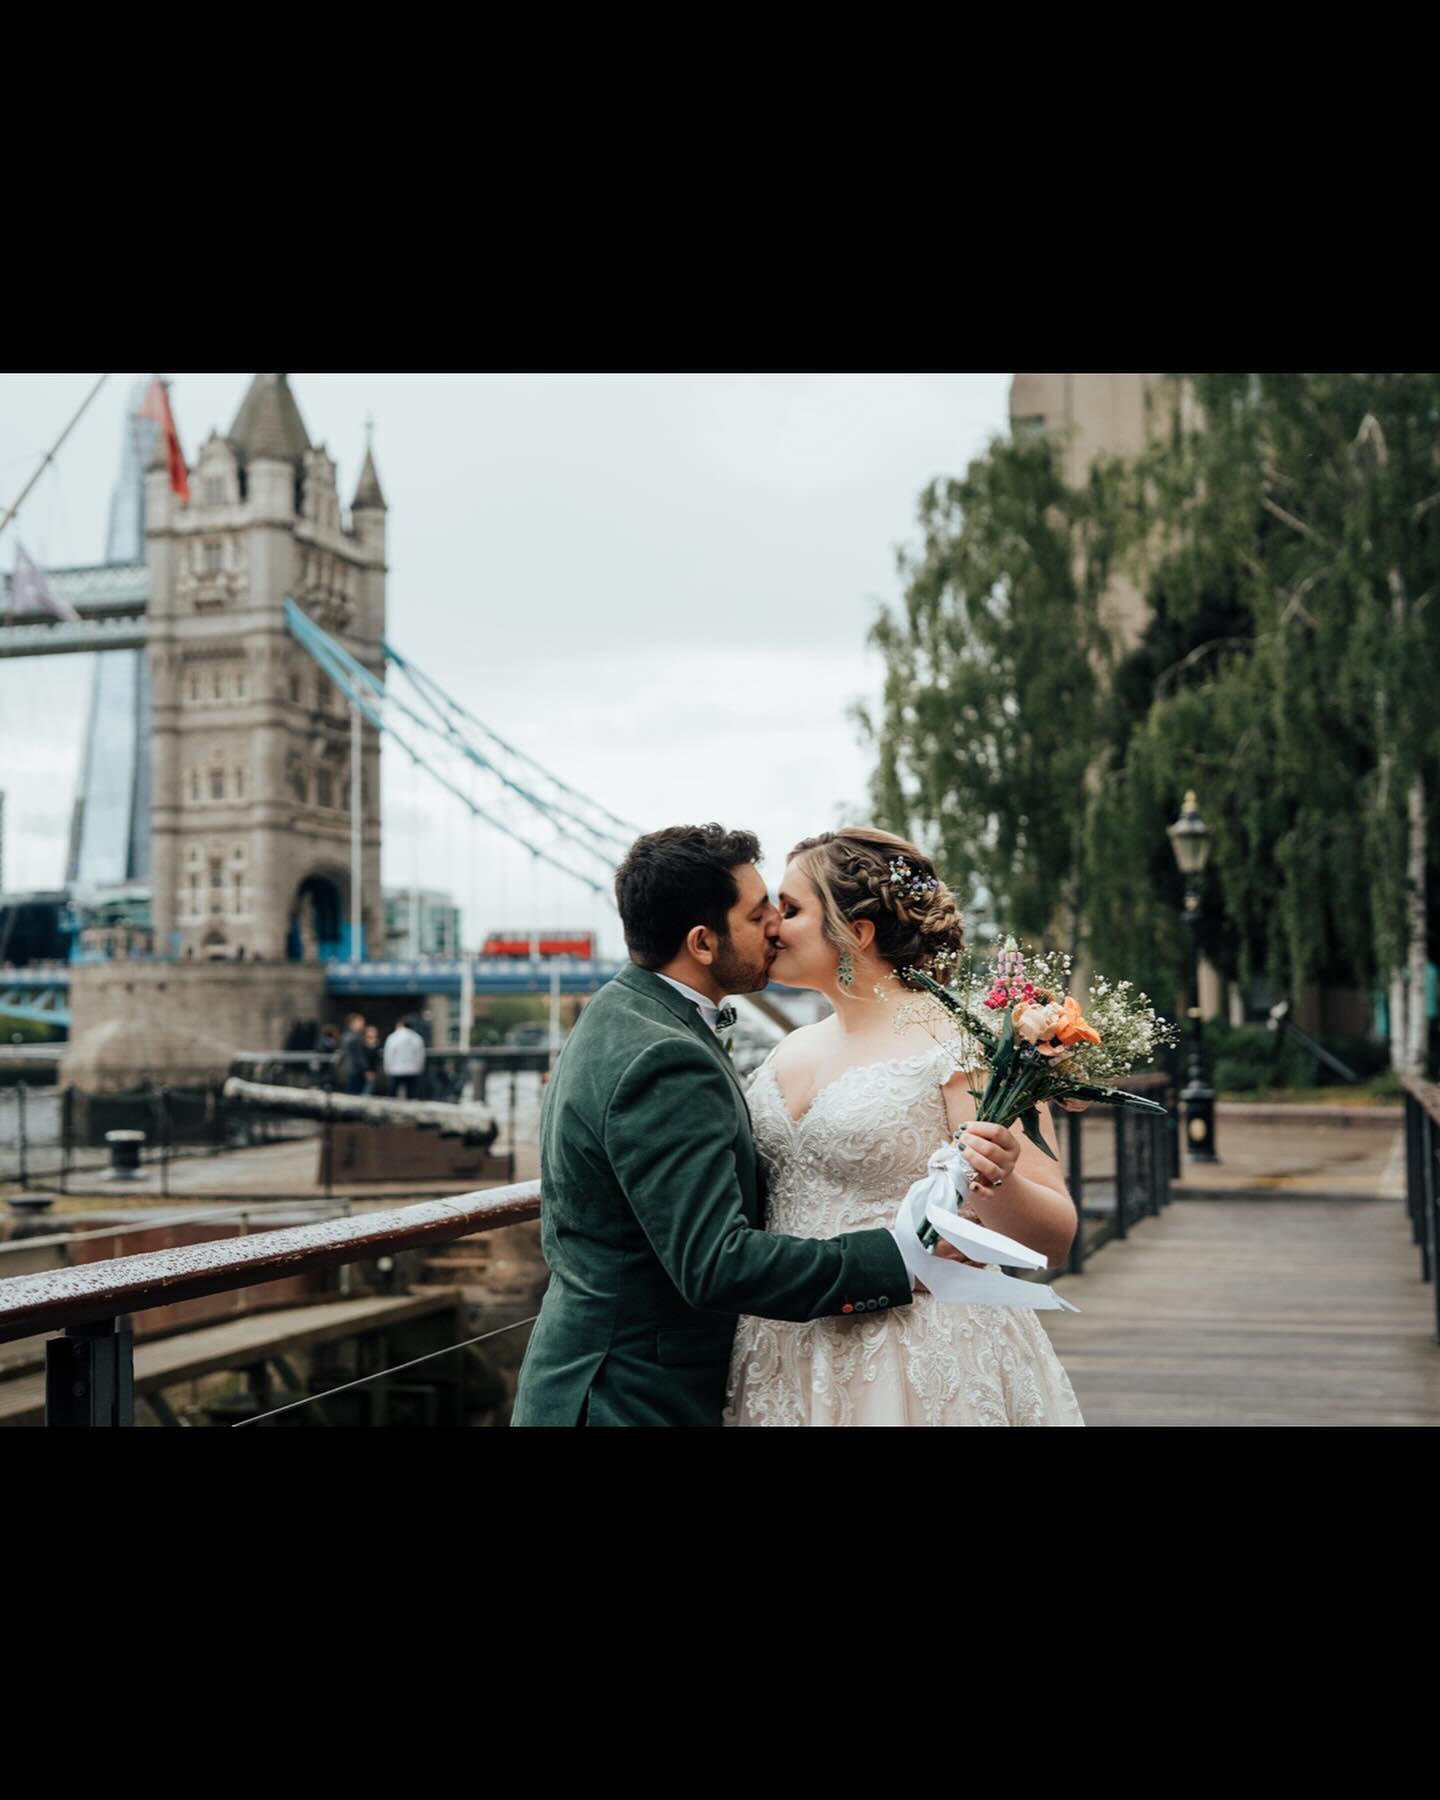 Huge congrats to the wonderful Emily and Furat! We had a brilliant day capturing their wedding day at the Dickens Inn on Saturday. I loved all their quirk DIY decorations, especially Emily&rsquo;s super impressive lego flower bouquet! My first full d